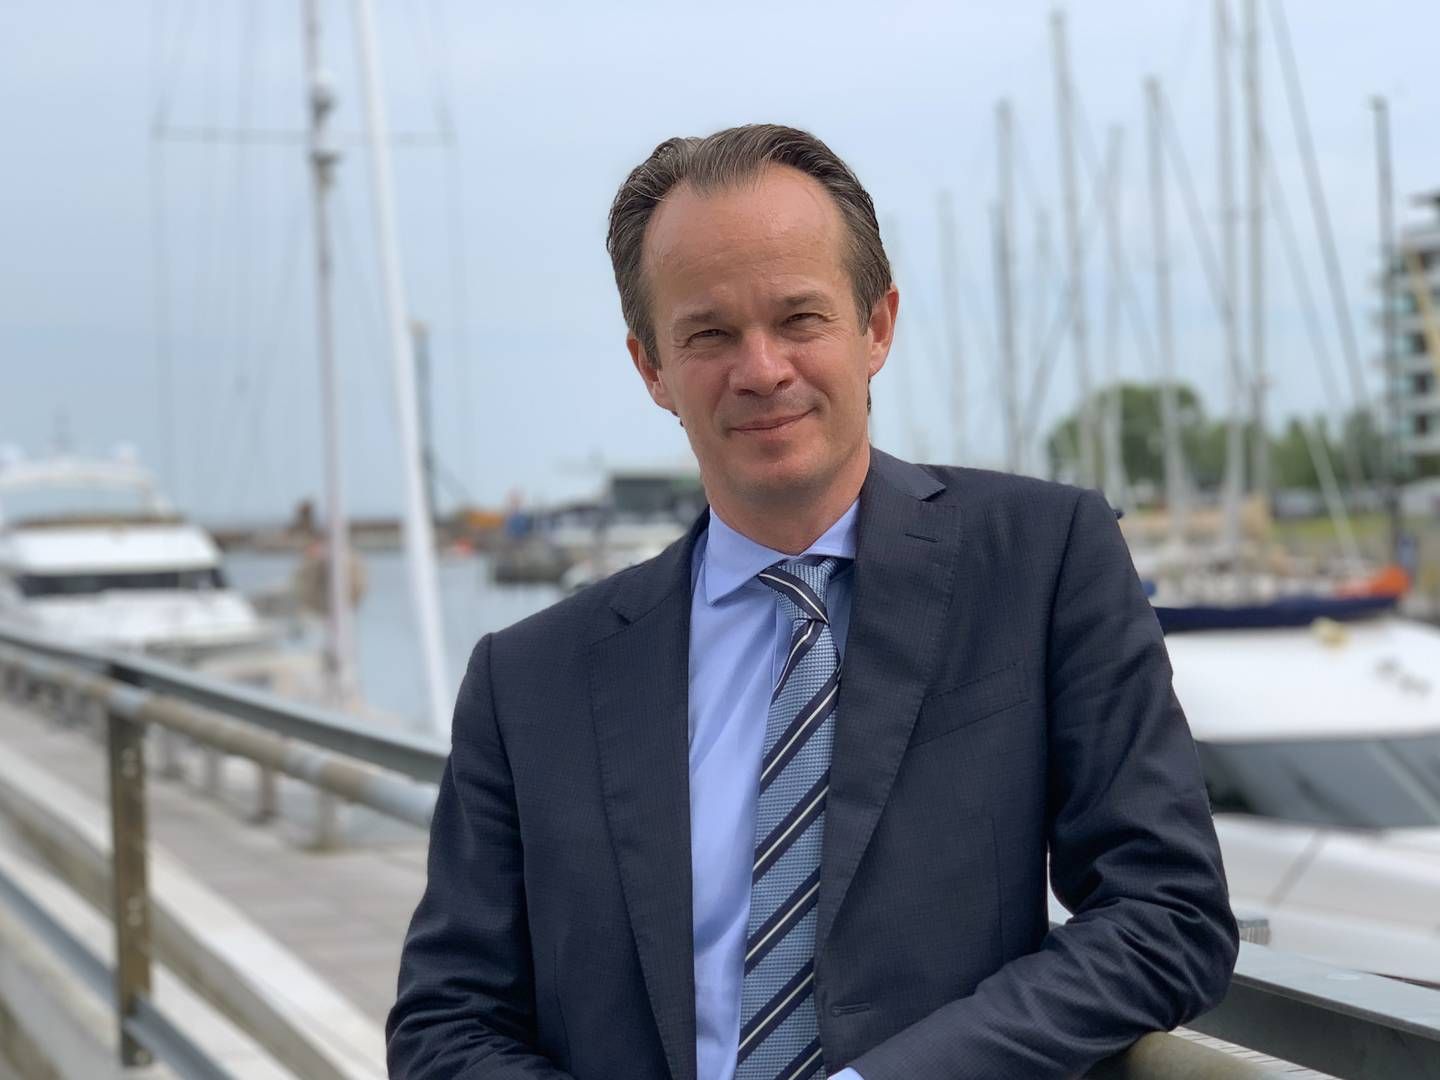 Jacob Meldgaard, CEO at Torm and chair at Danish Shipping, is tightening the climate goals of the tanker carrier. | Photo: PR/Torm